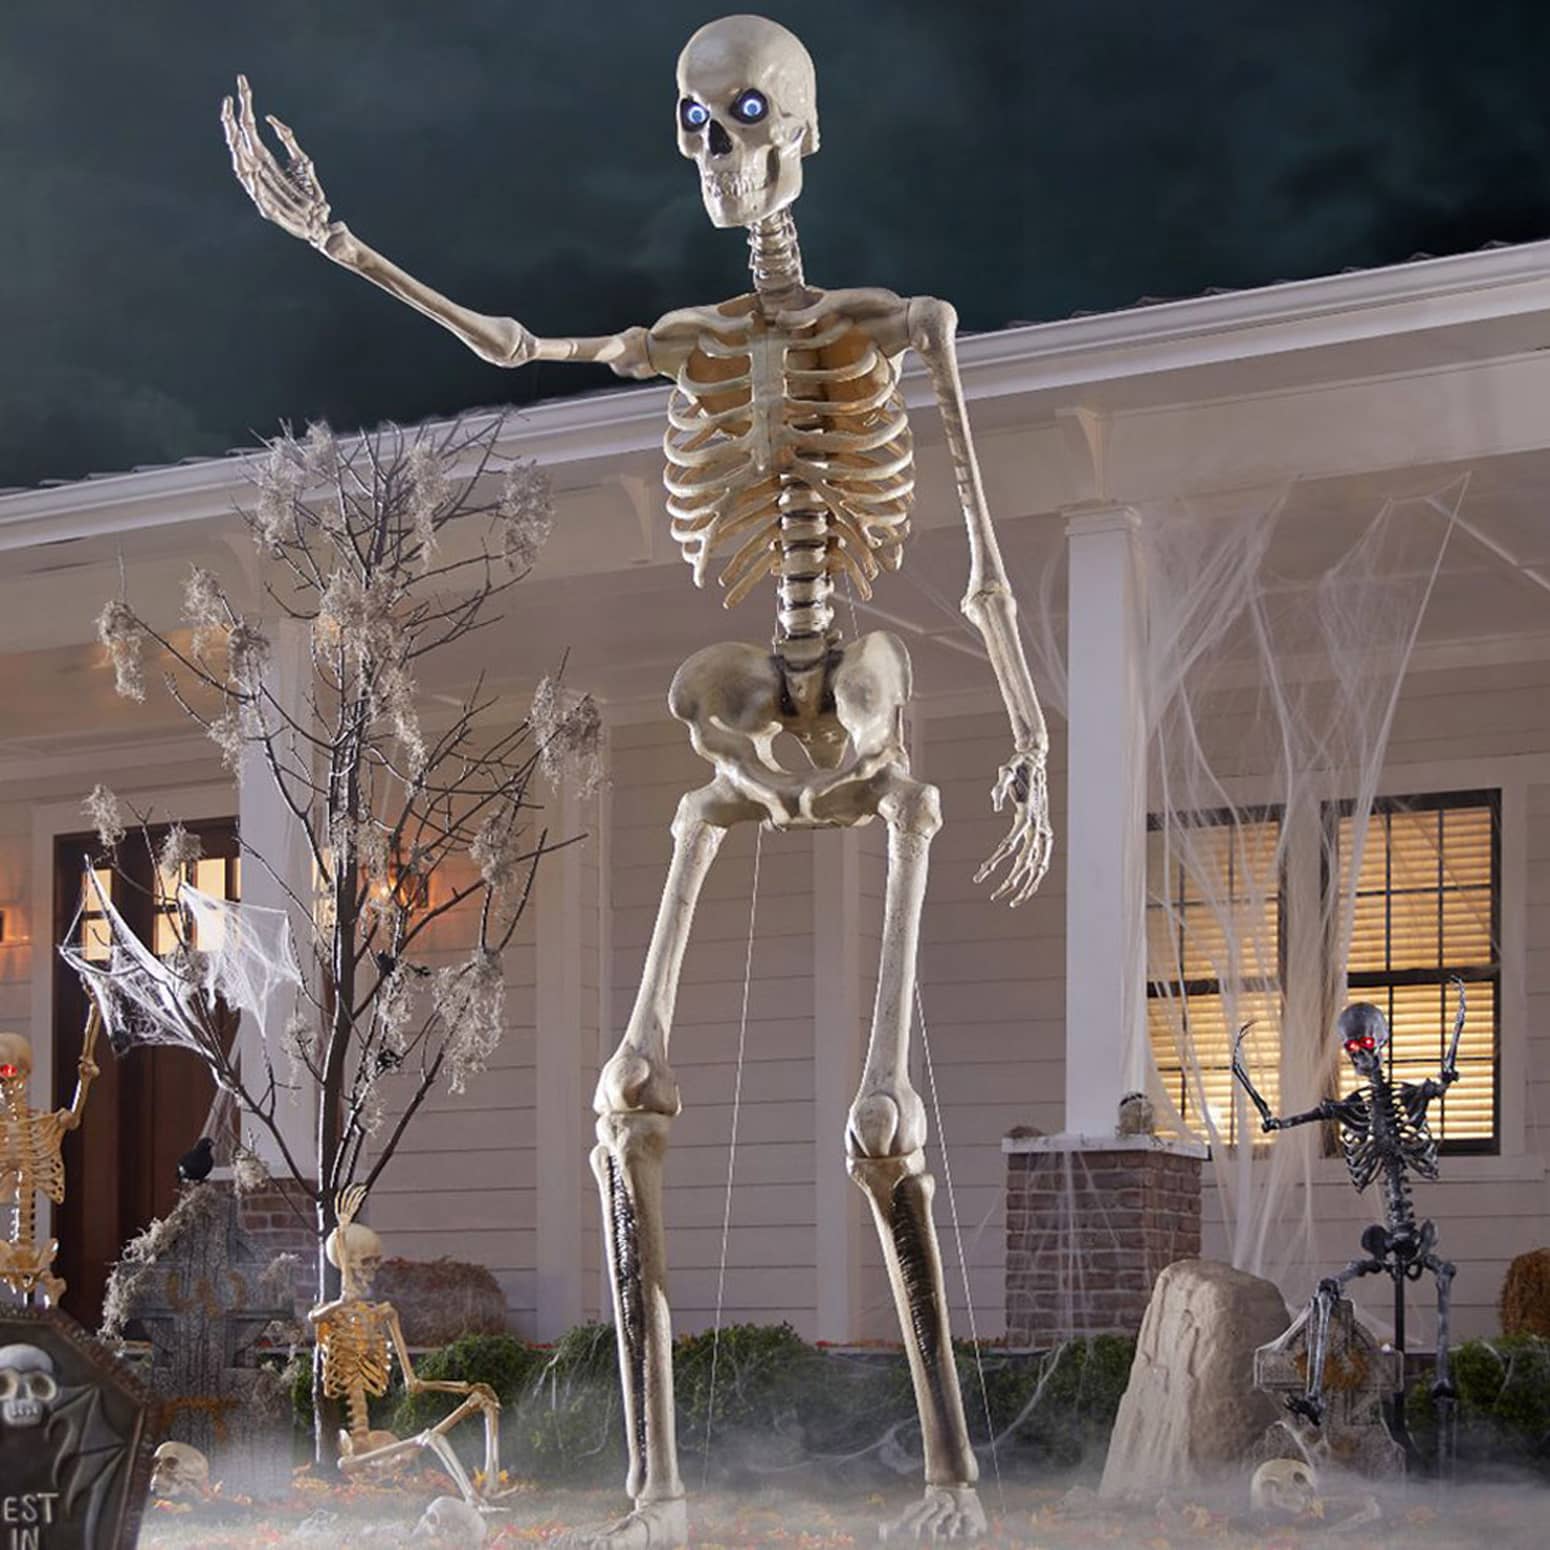 Terrifying 12 Foot Tall Giant Skeleton With Animated LCD Eyes